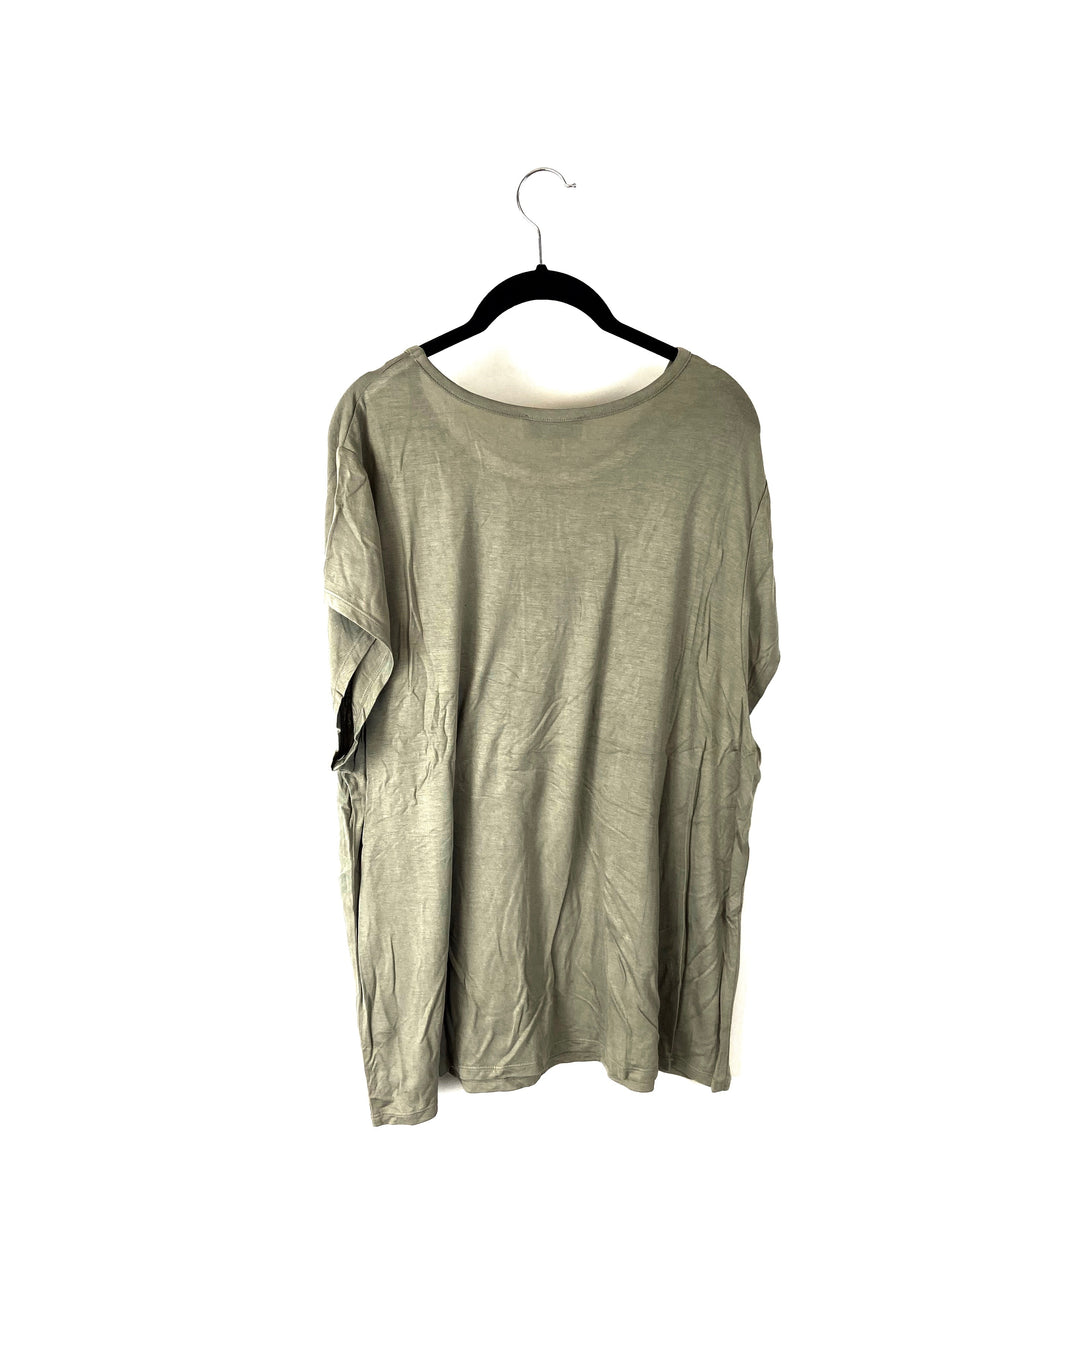 Army Green Short Sleeve Top - 1X